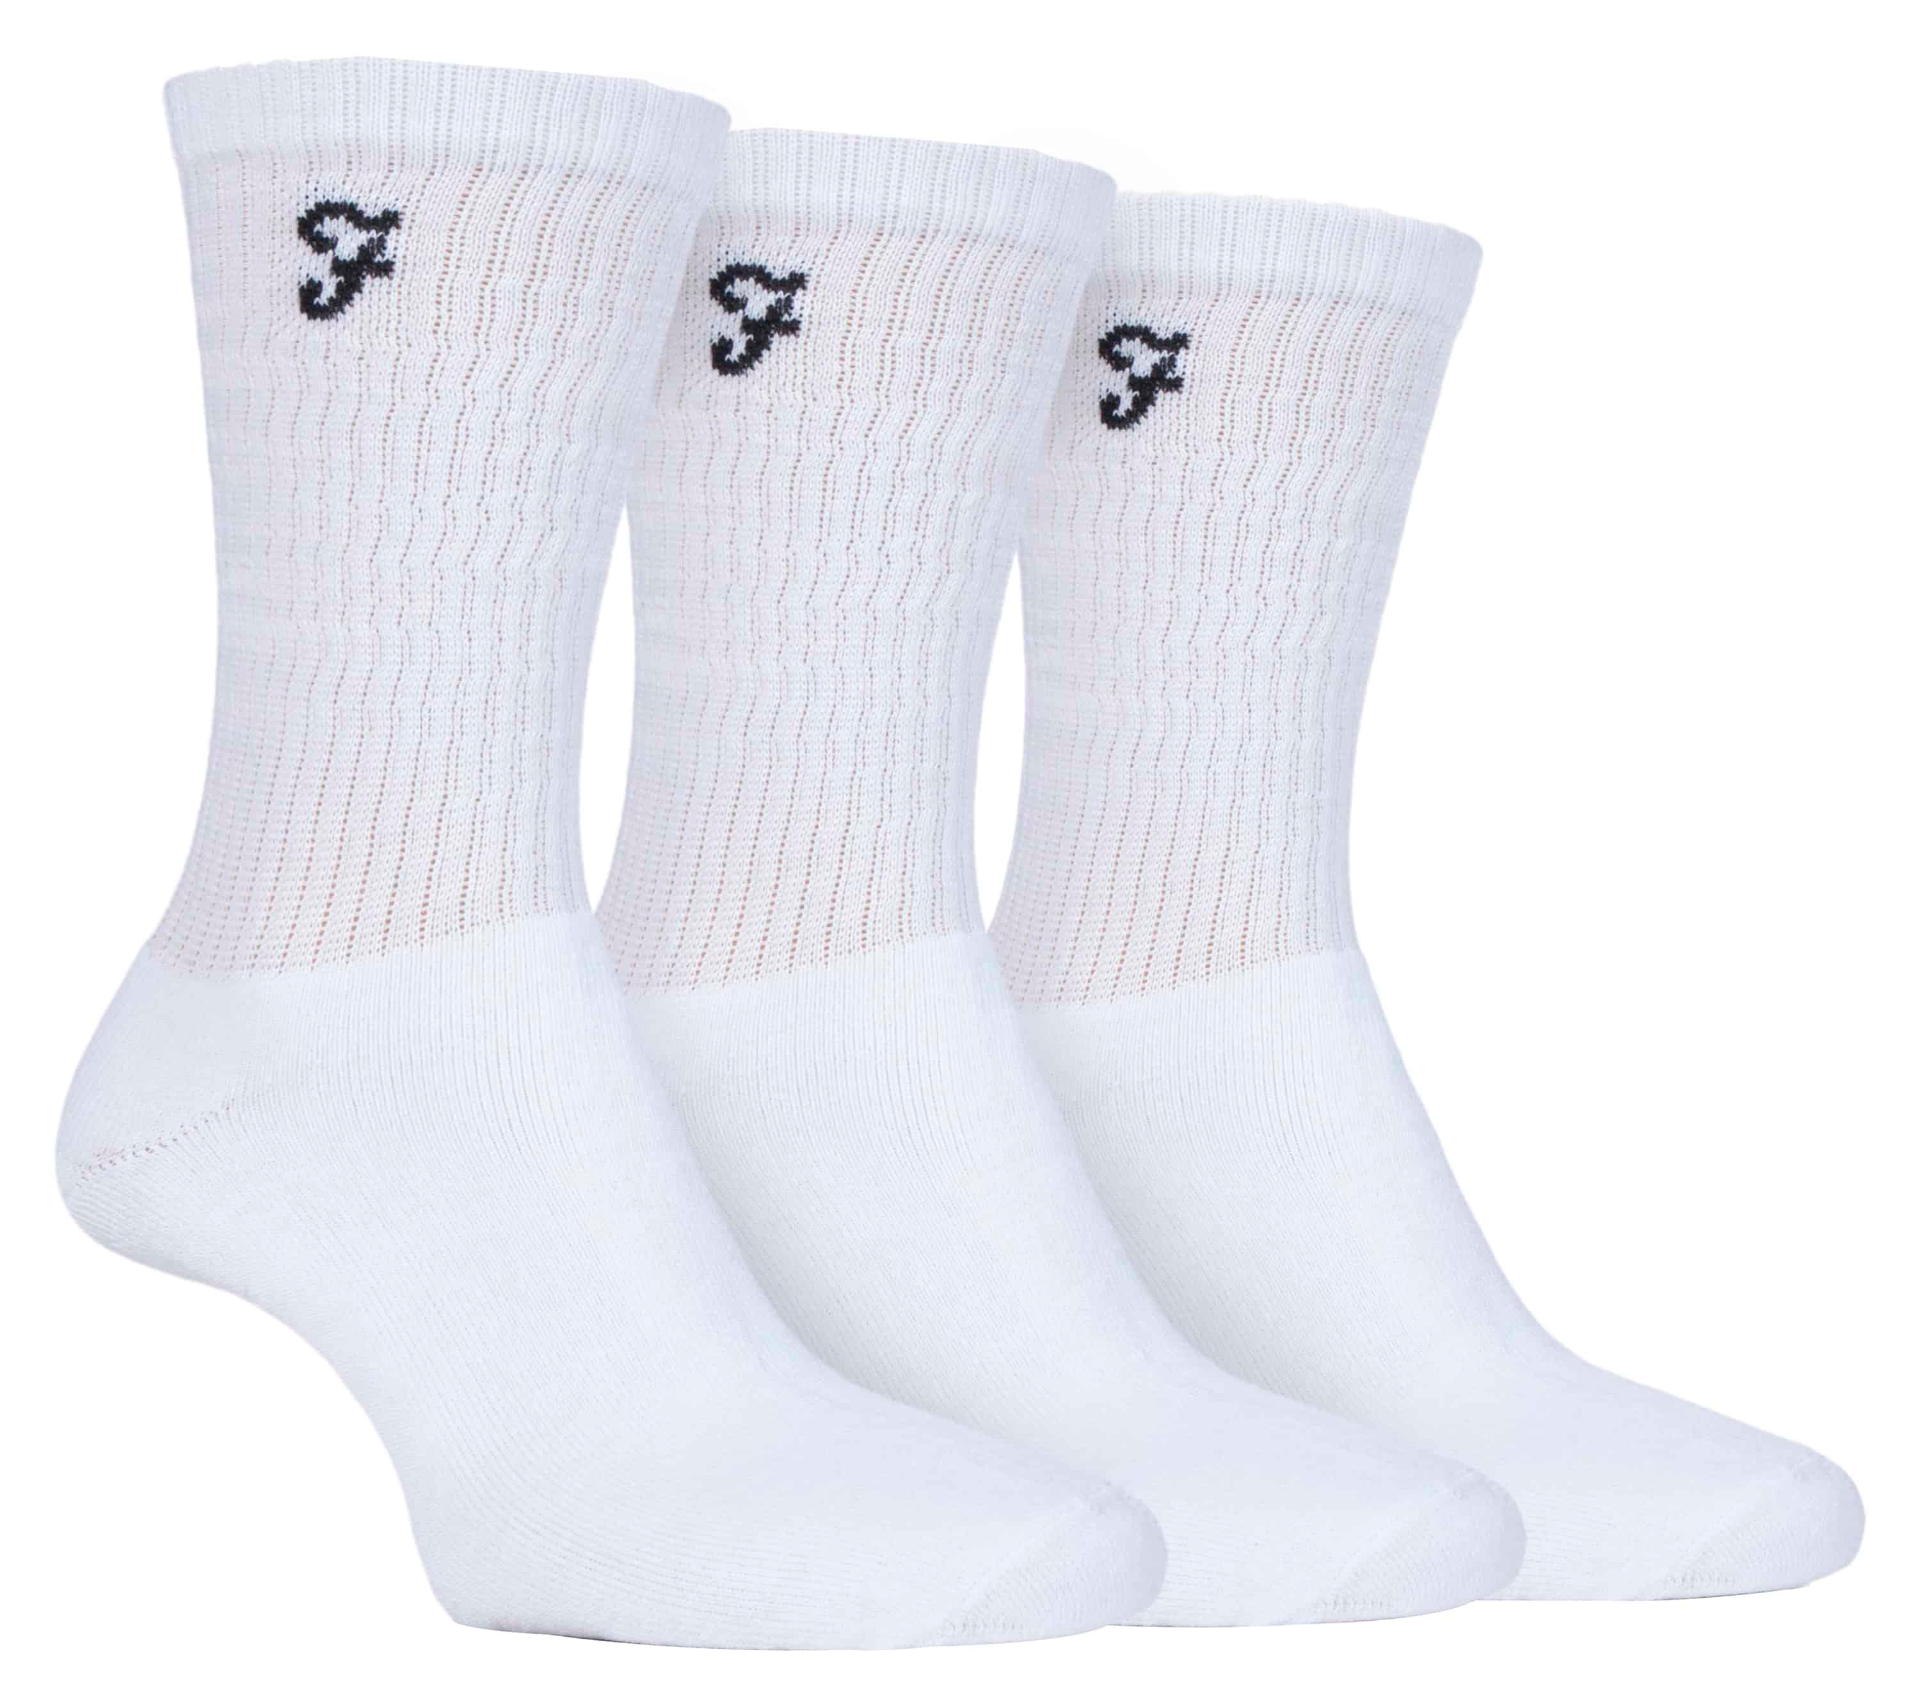 3 Pairs Mens Cushioned Sole Athletic Sports Socks